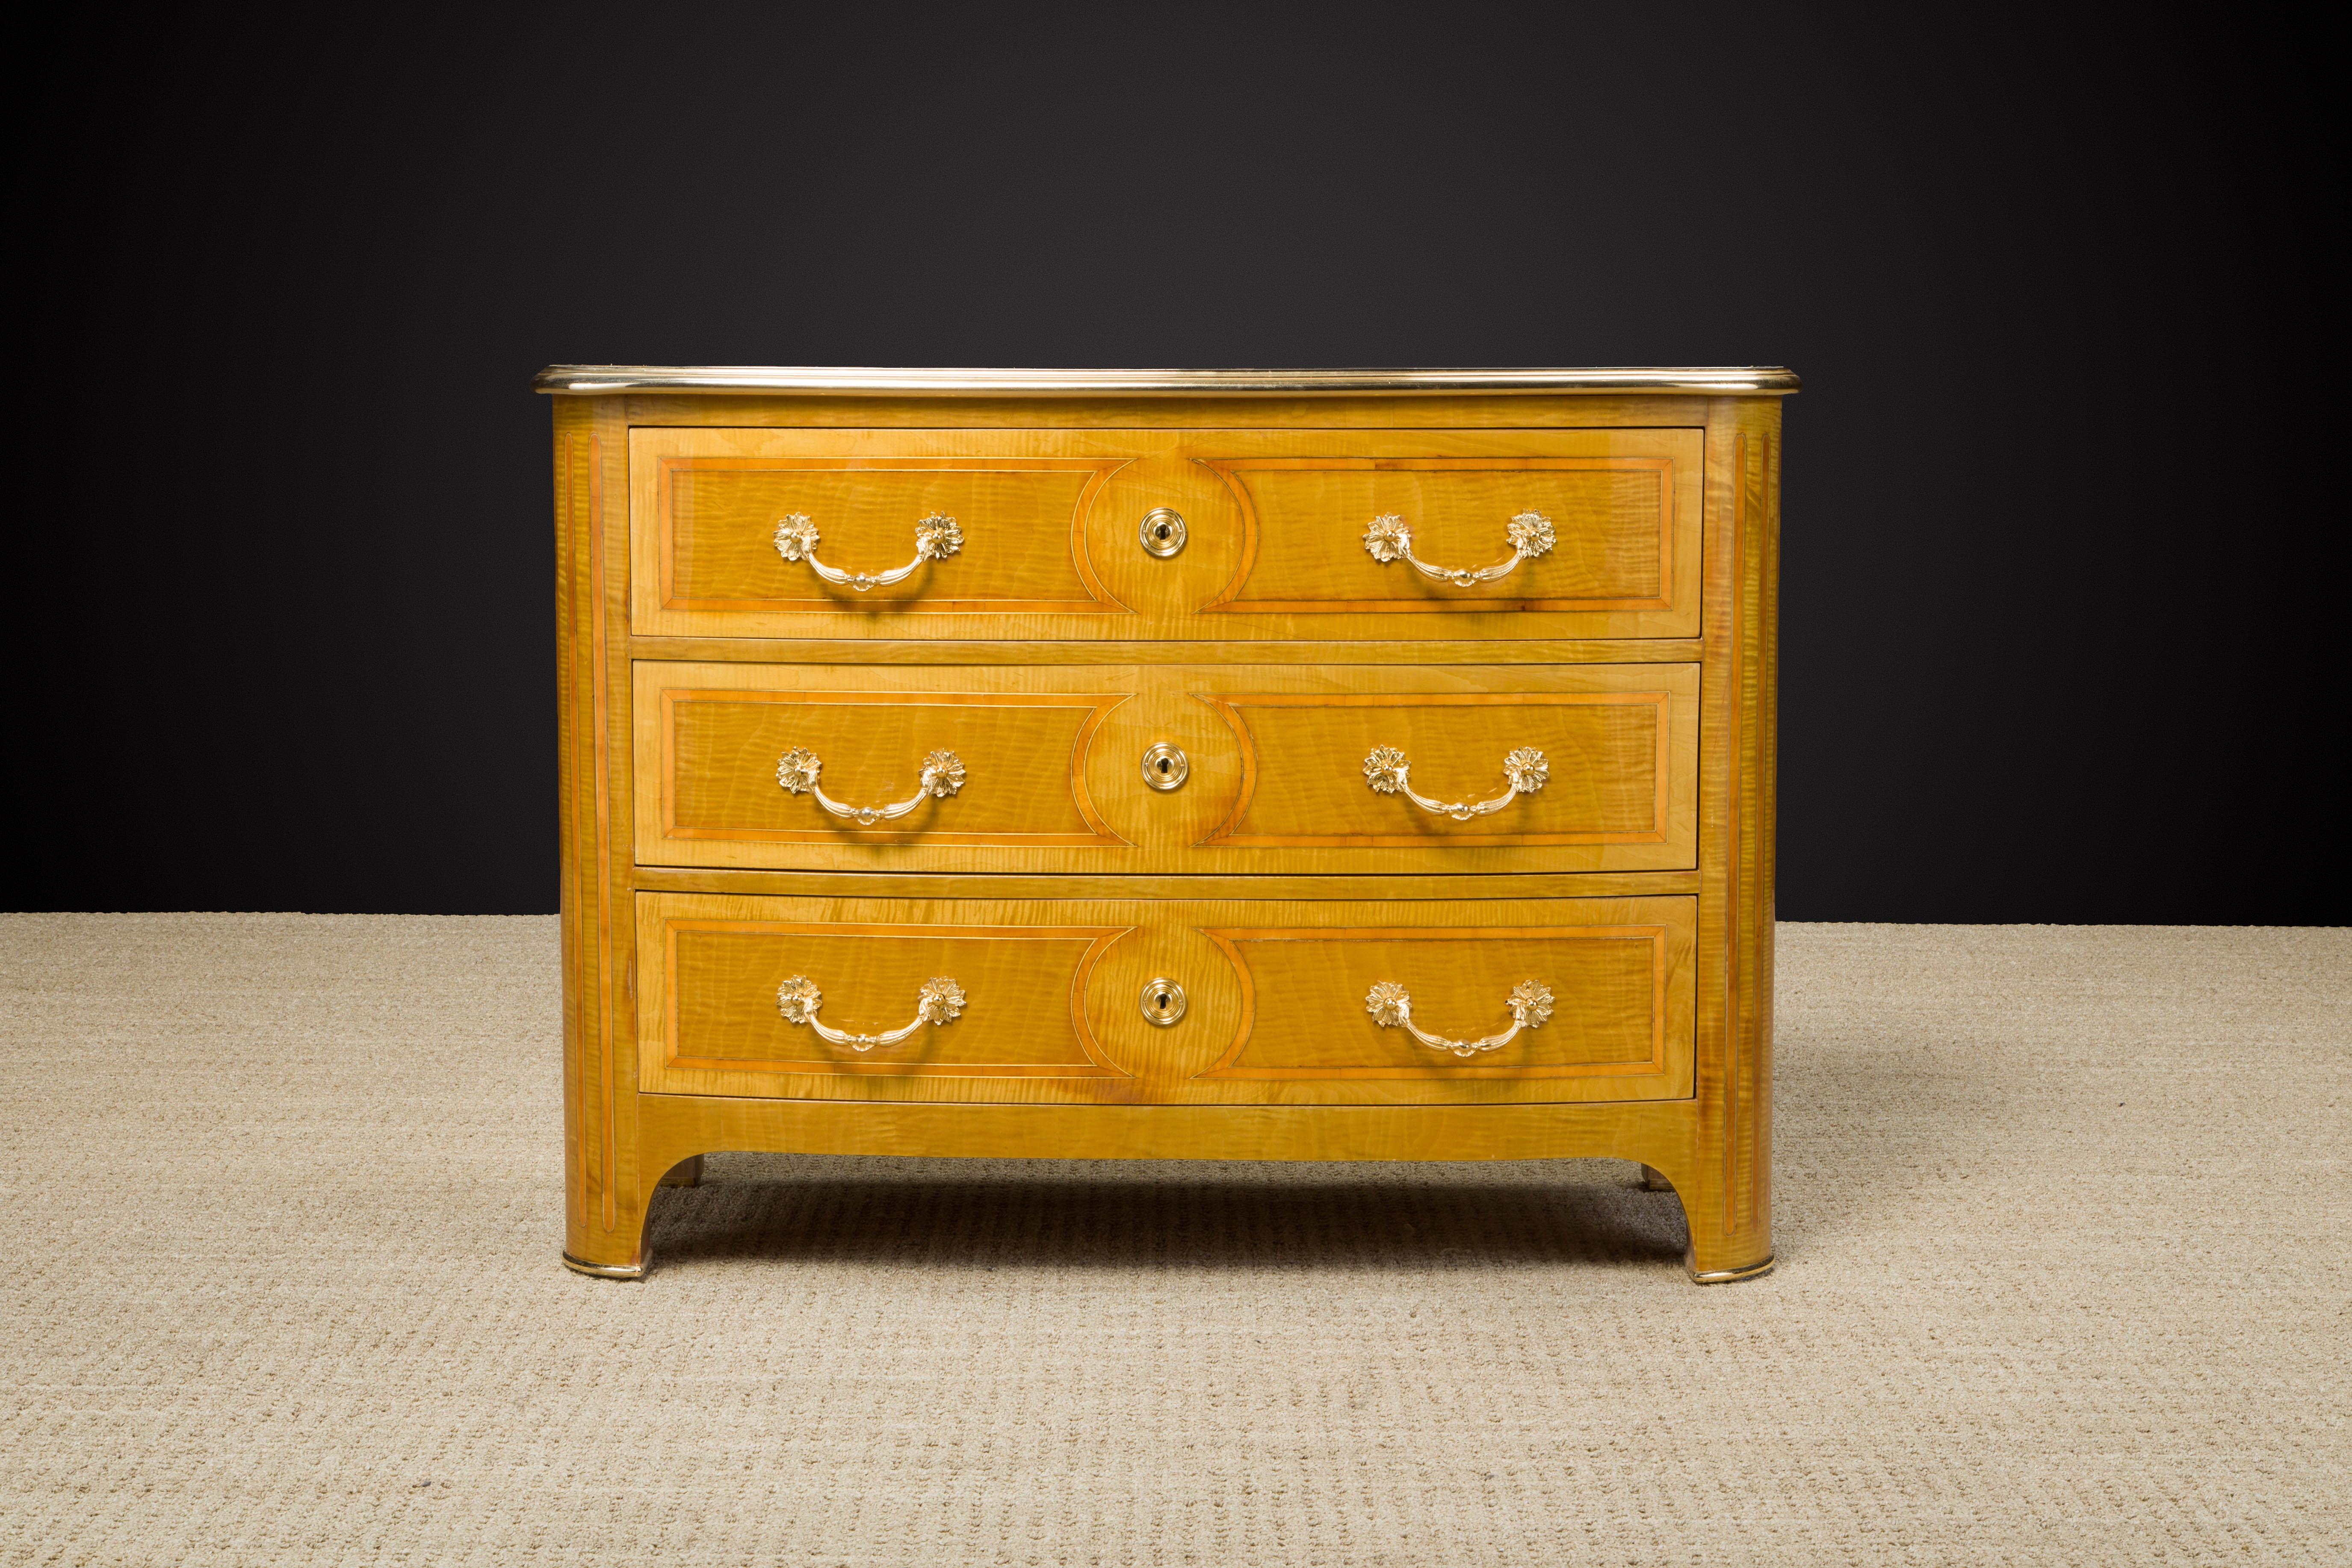 A beautiful fine Maison Jansen commode (France, c. 1960s) with exotic marquetry woods, brass inlay and brass trim, a similar example documented in the book 'Jansen Furniture' by James Archer Abbot.

We provided this commode with a new French